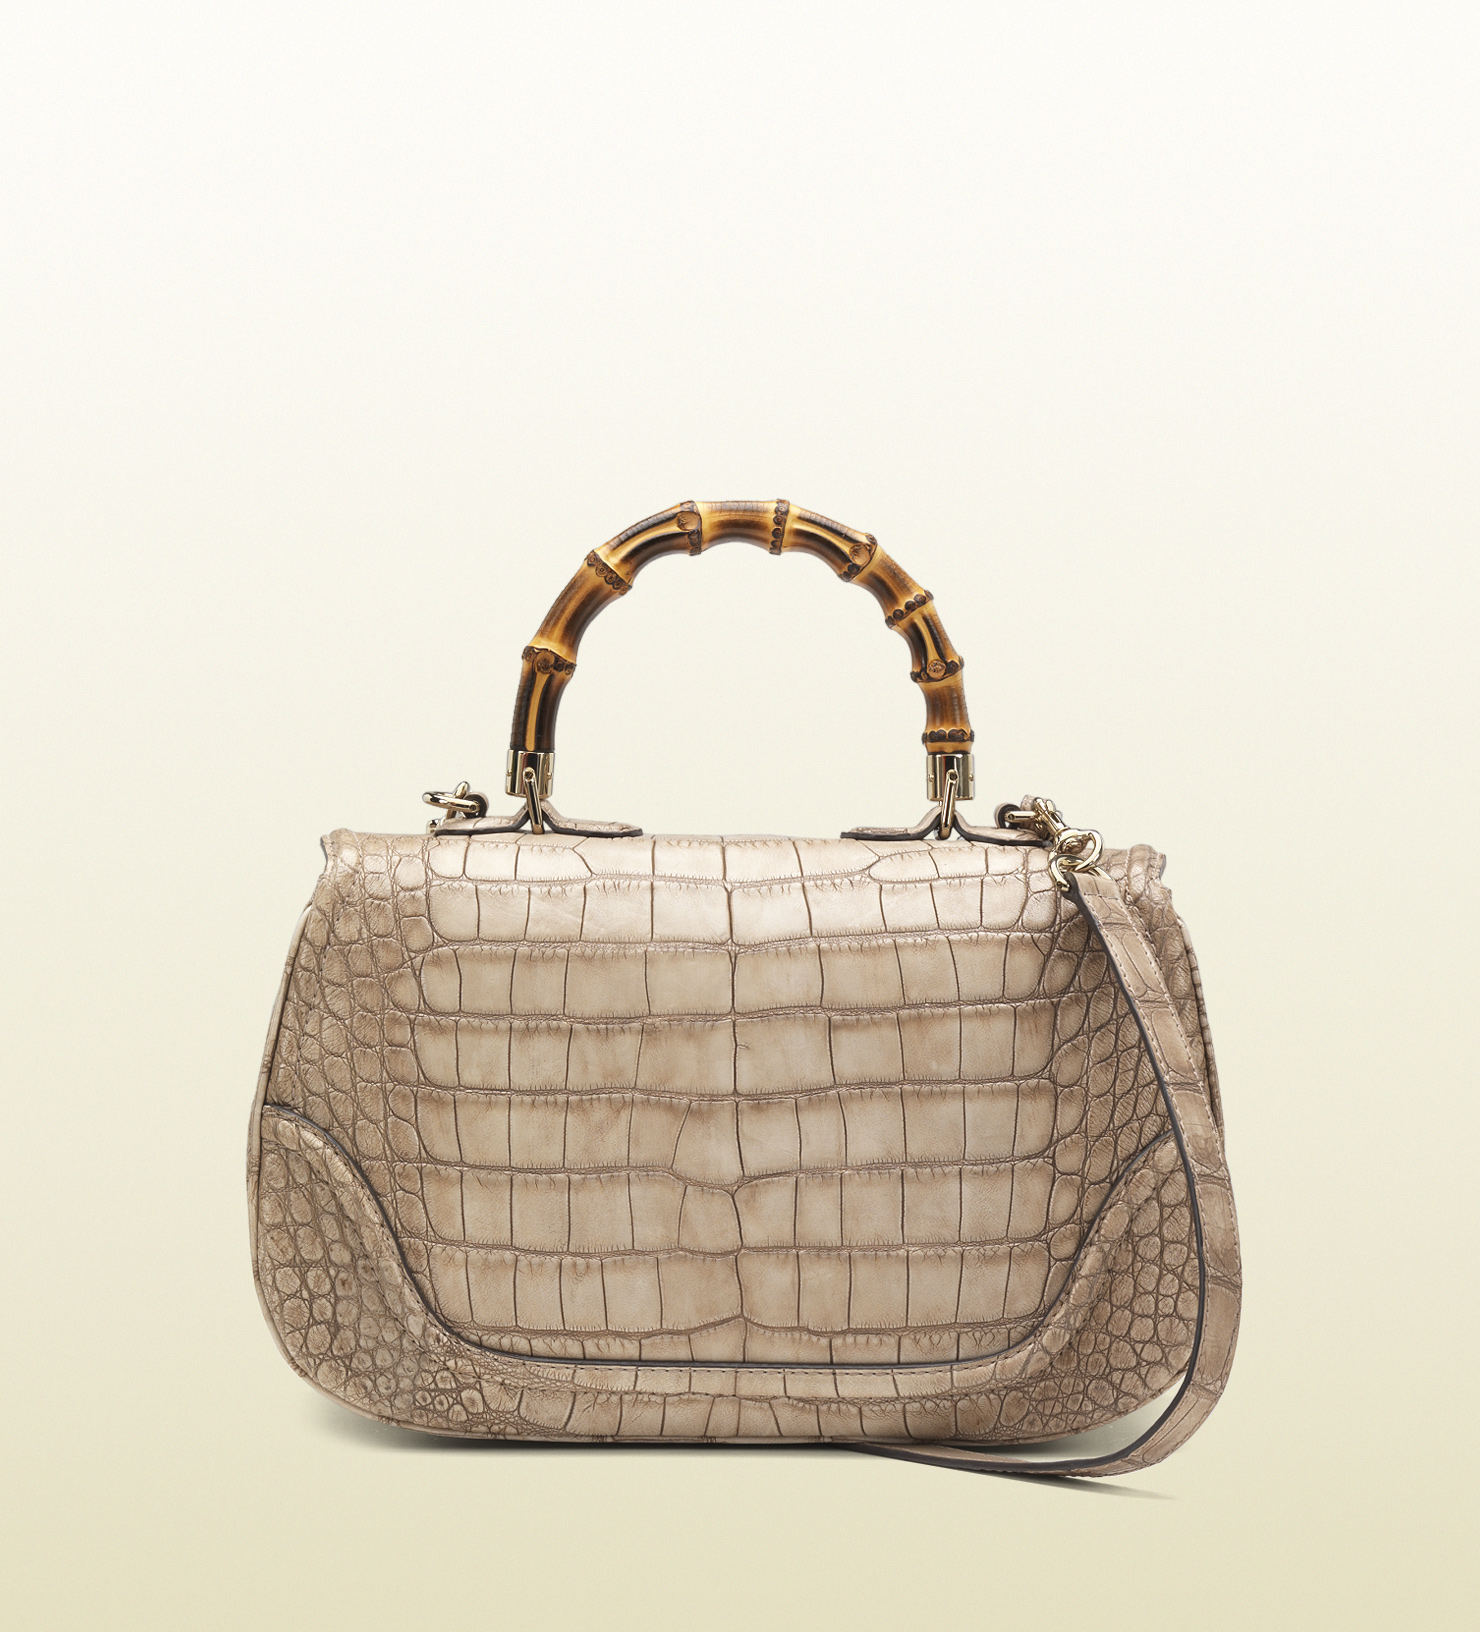 Lyst - Gucci New Bamboo Crocodile Top Handle Bag in Natural